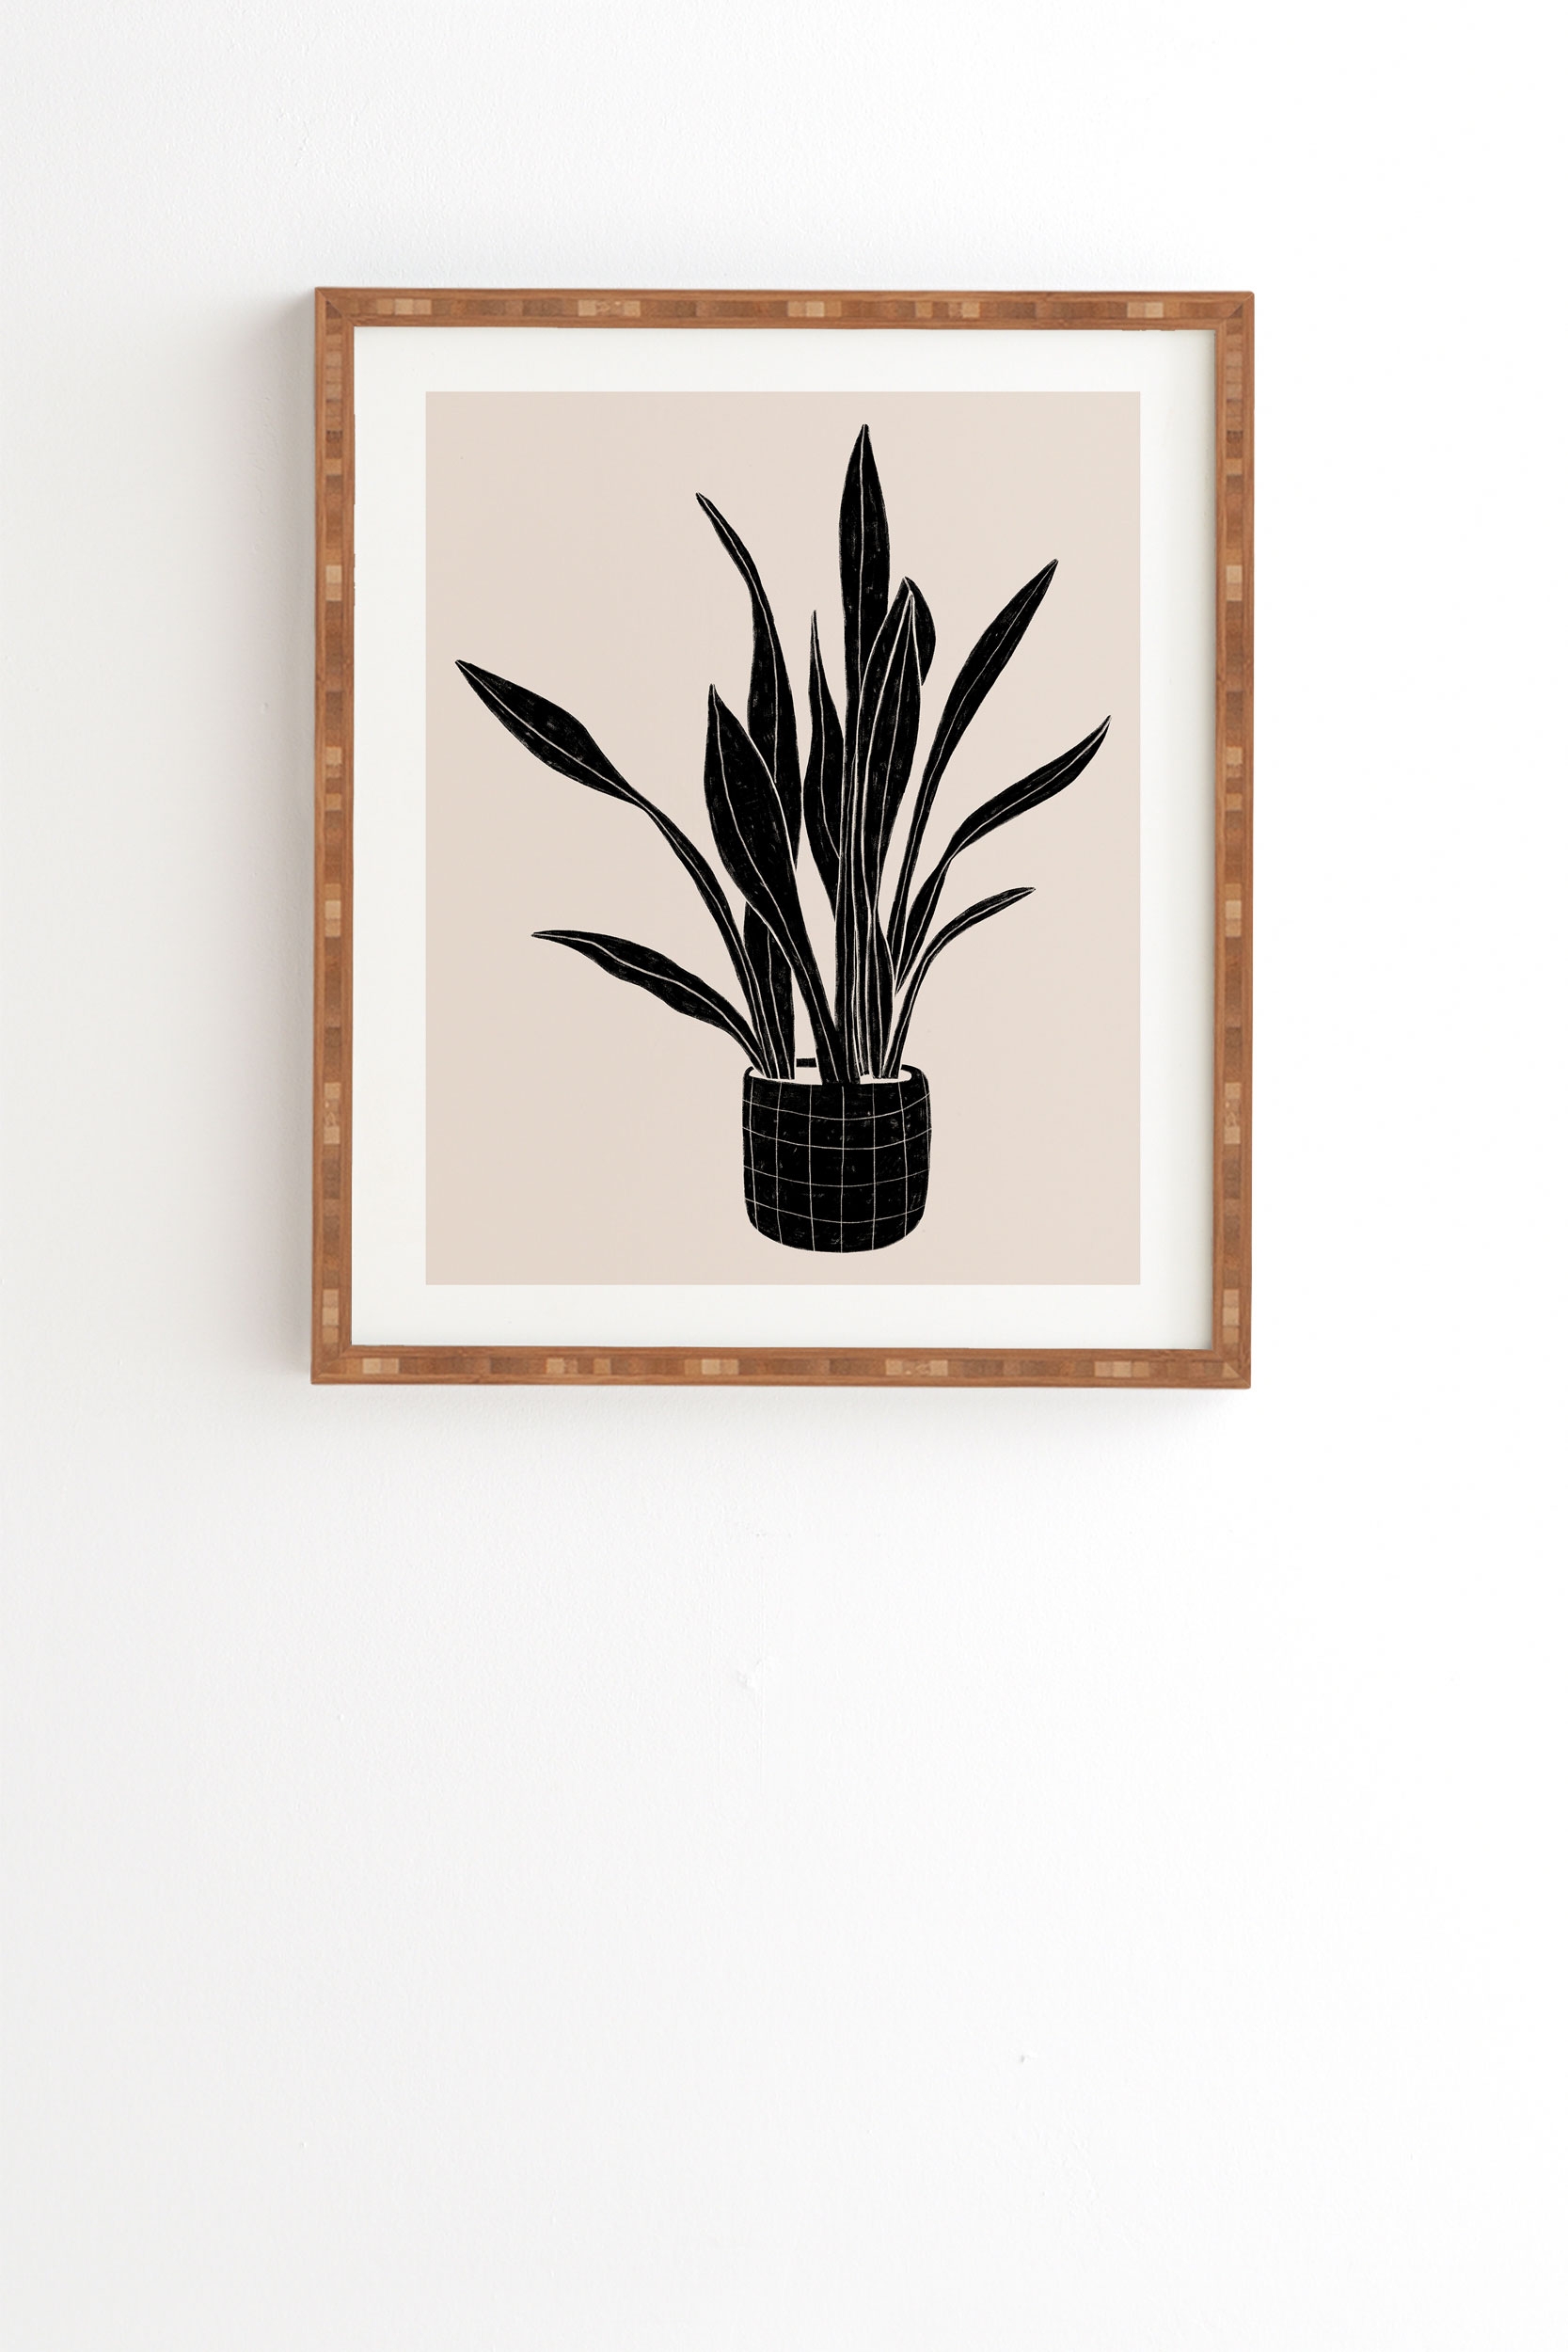 Black And White Snake Plant by Alisa Galitsyna - Framed Wall Art Bamboo 12" x 12" - Image 1